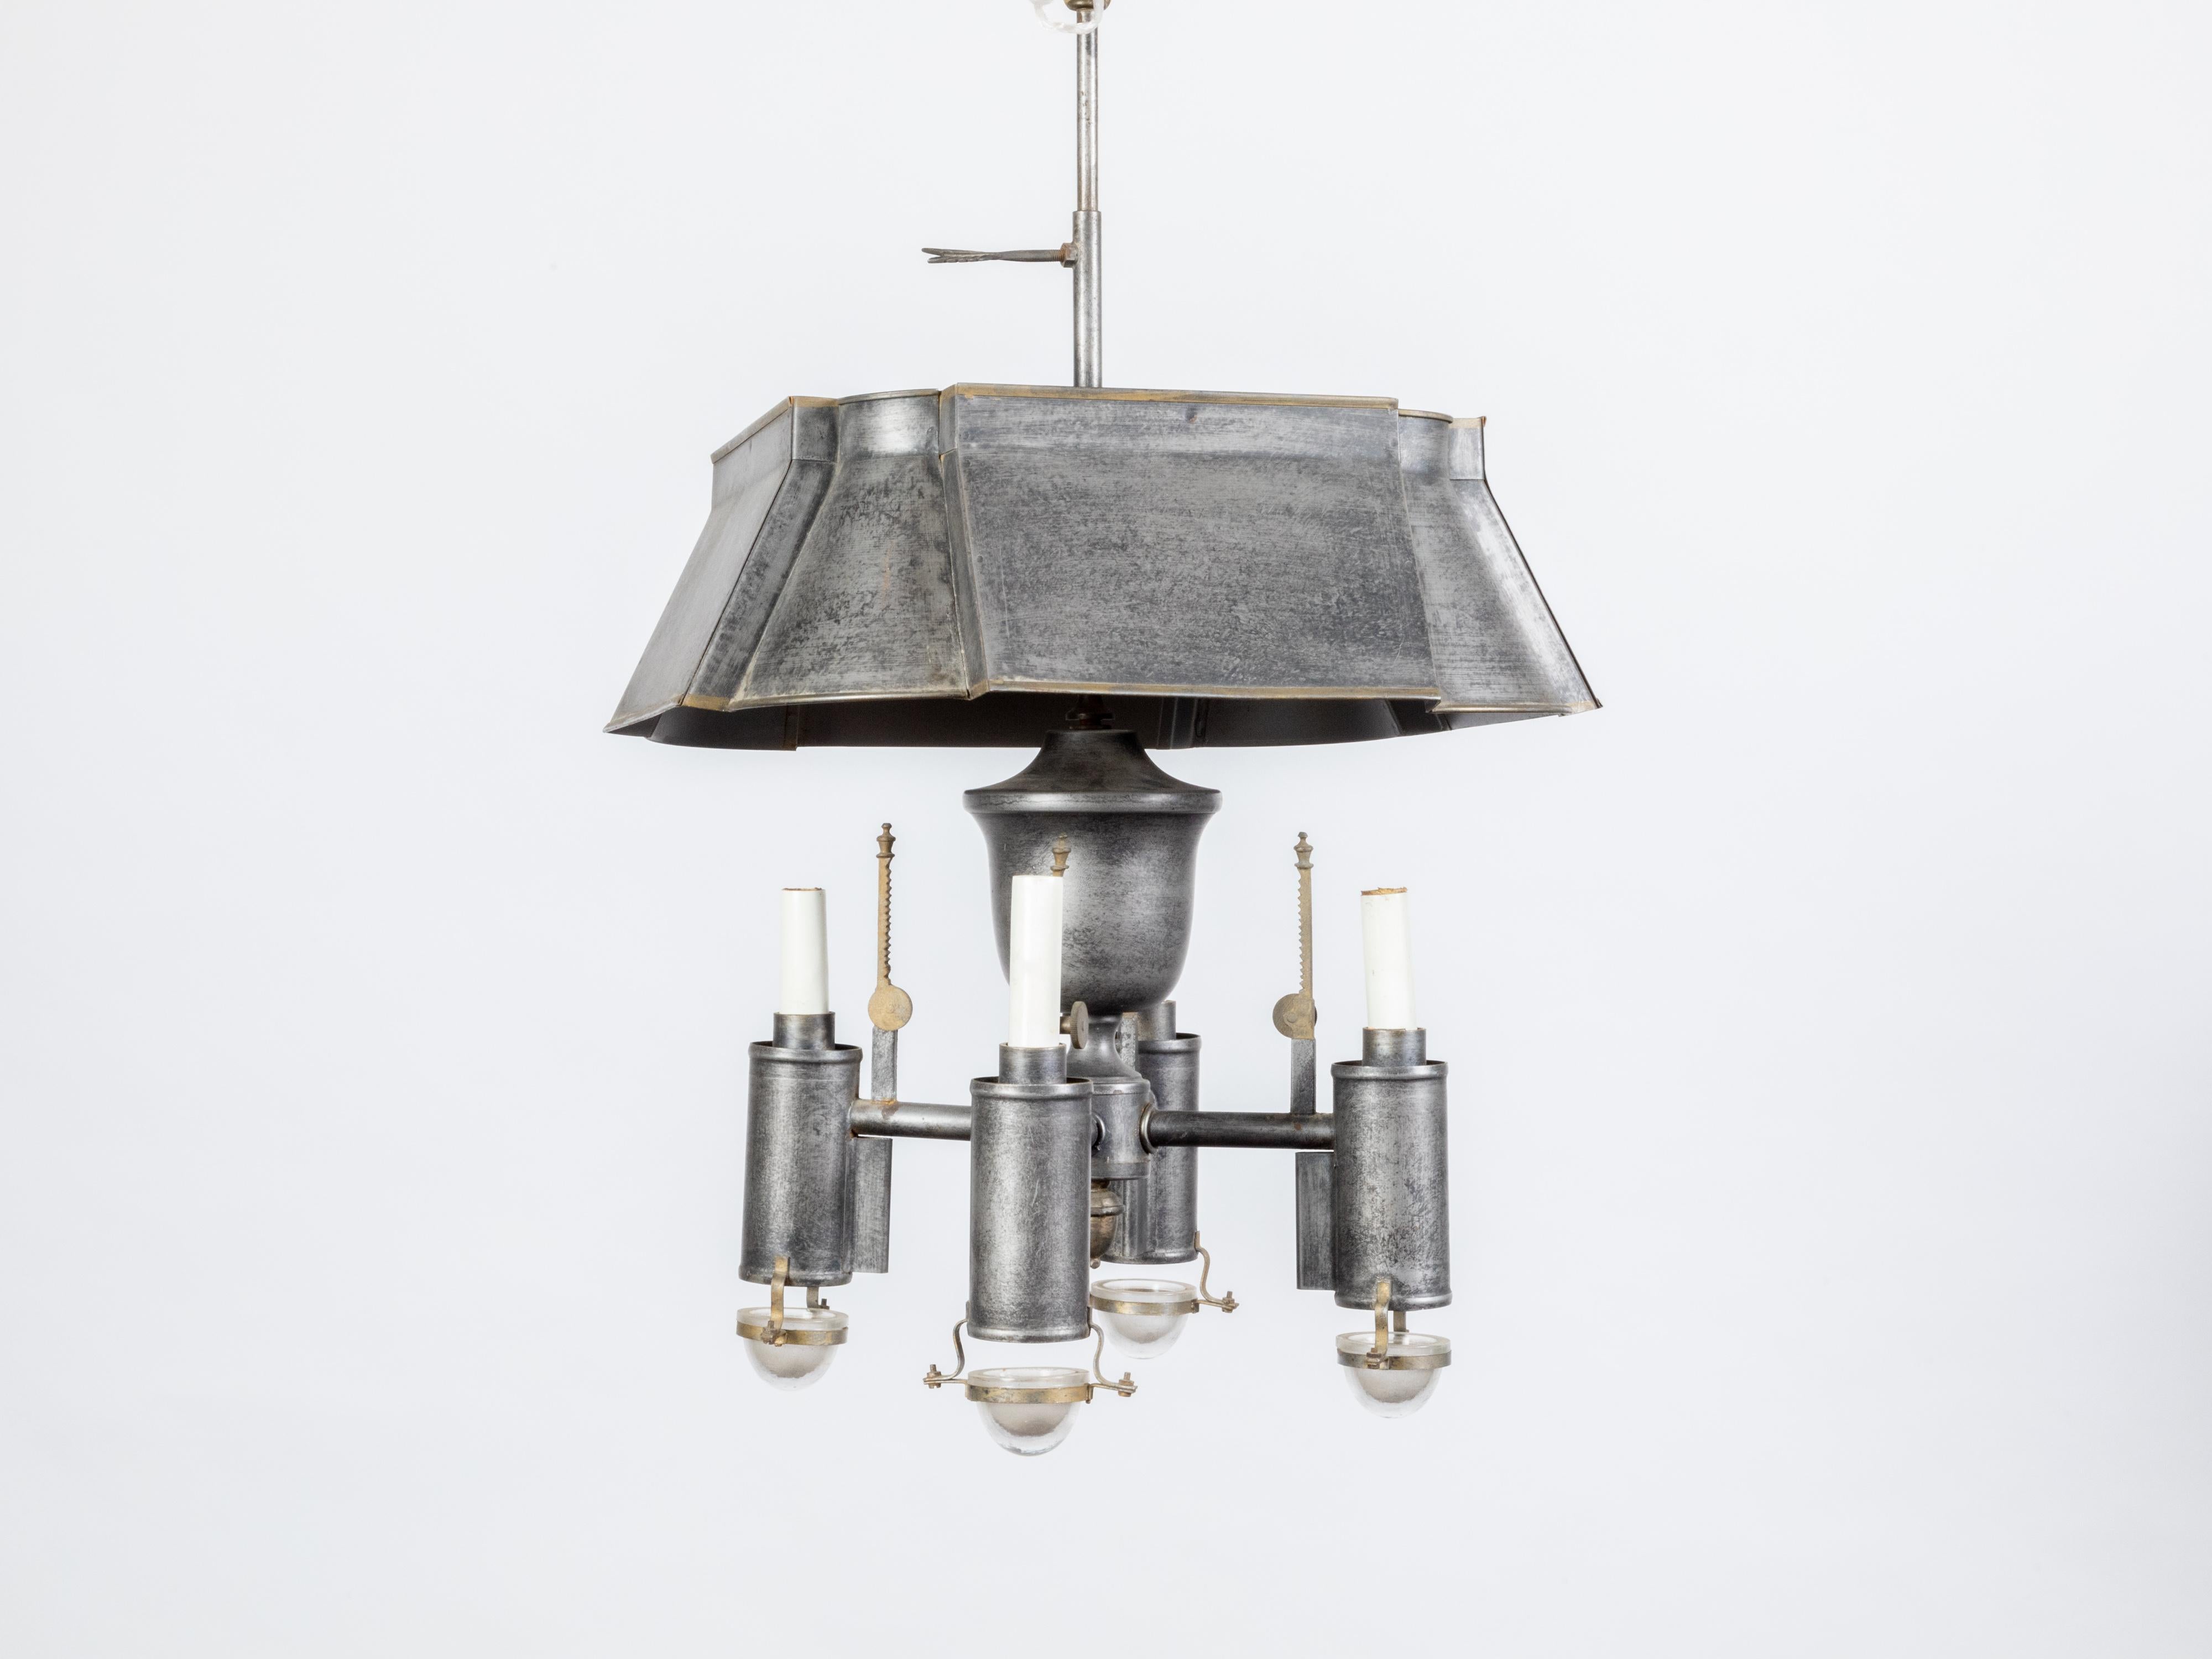 A French tôle chandelier from the mid 20th century, with four lights and glass cups. Created in France during the midcentury period, this tôle chandelier features a square shaped tôle shade with rounded corners, sitting above a central baluster